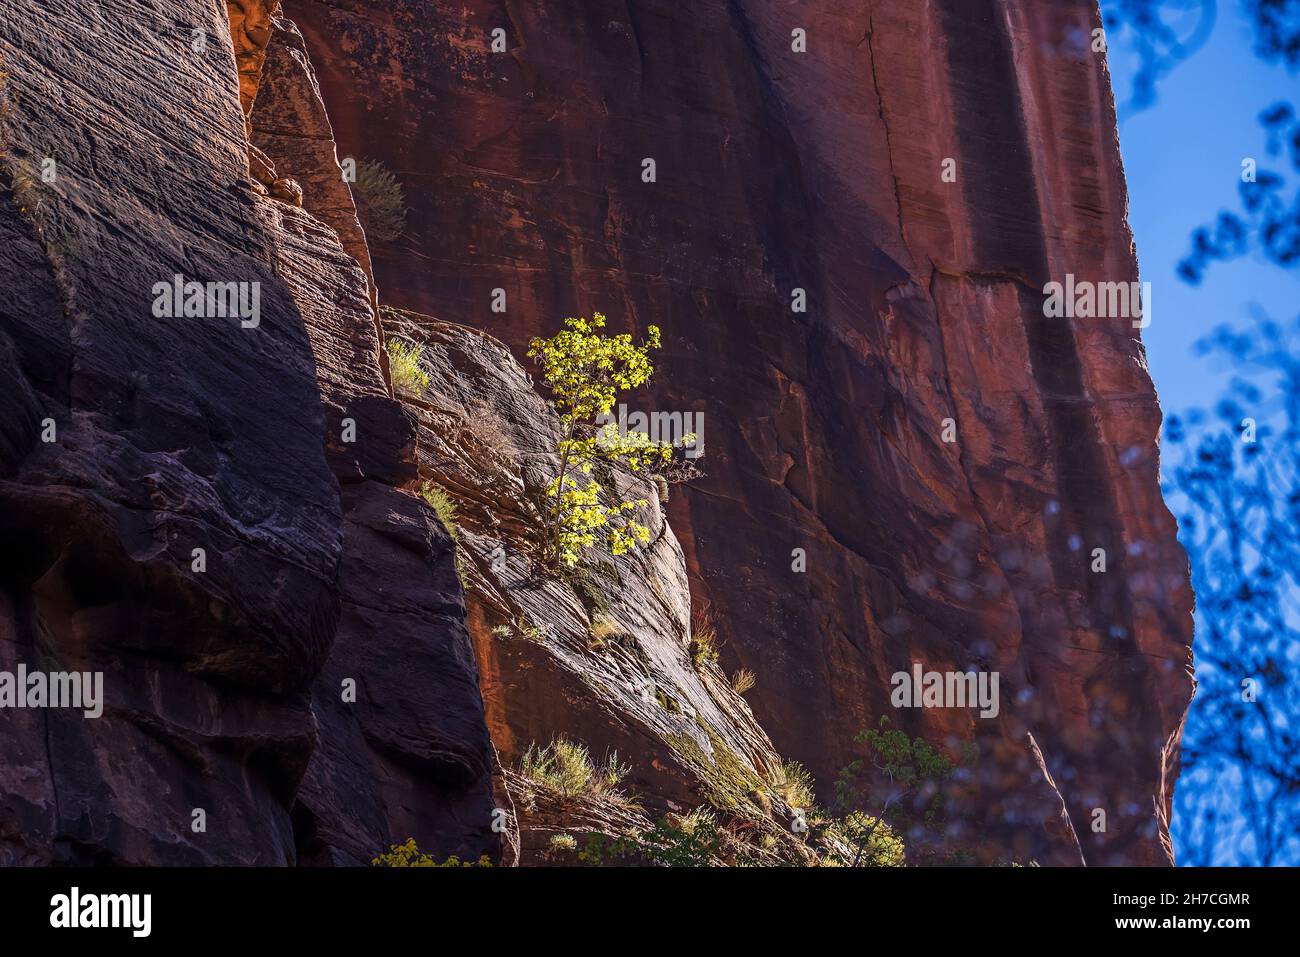 A single tree with fall colors grows out of the rock along the Riverside Walk trail in Zion National Park, Springdale, Washington County, Utah, USA. Stock Photo